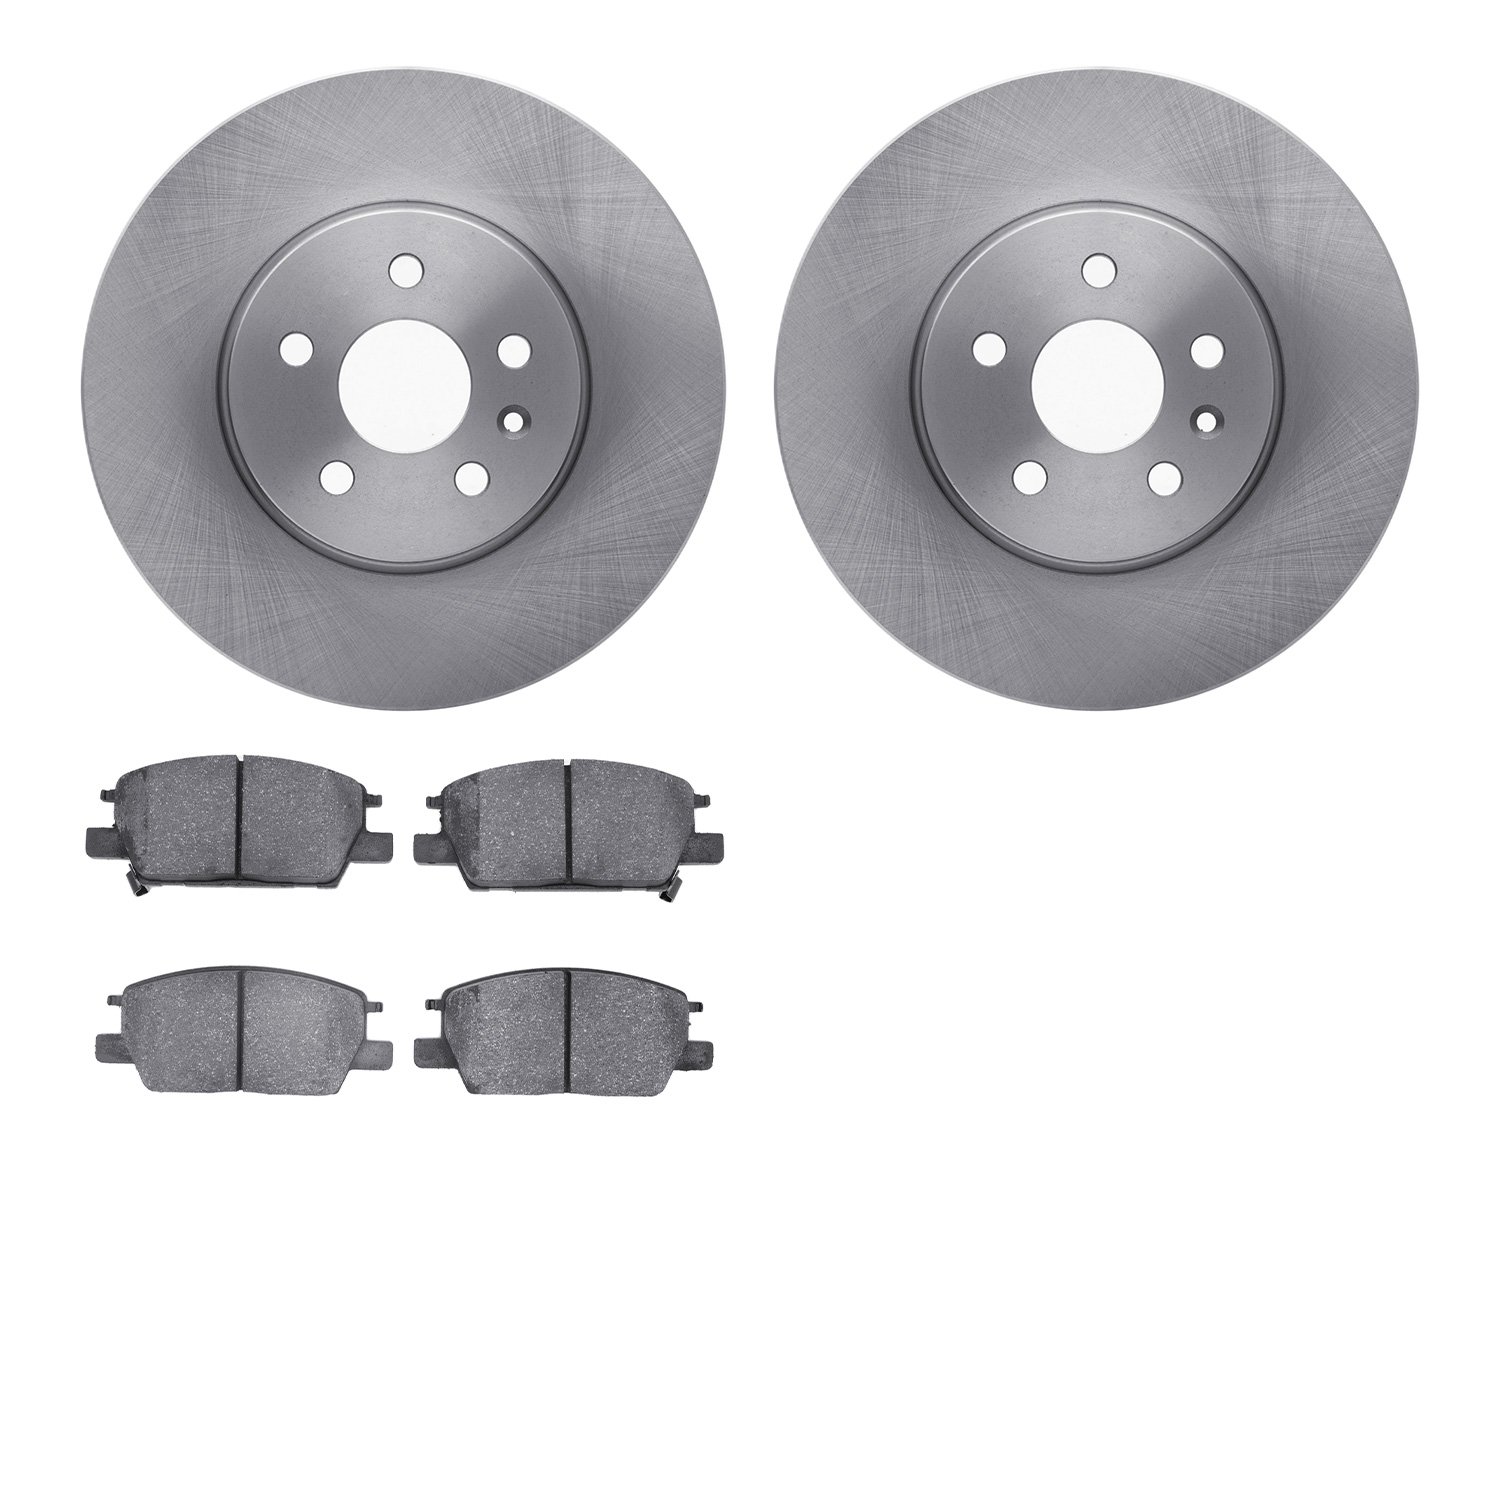 6302-45032 Brake Rotors with 3000-Series Ceramic Brake Pads Kit, Fits Select GM, Position: Front